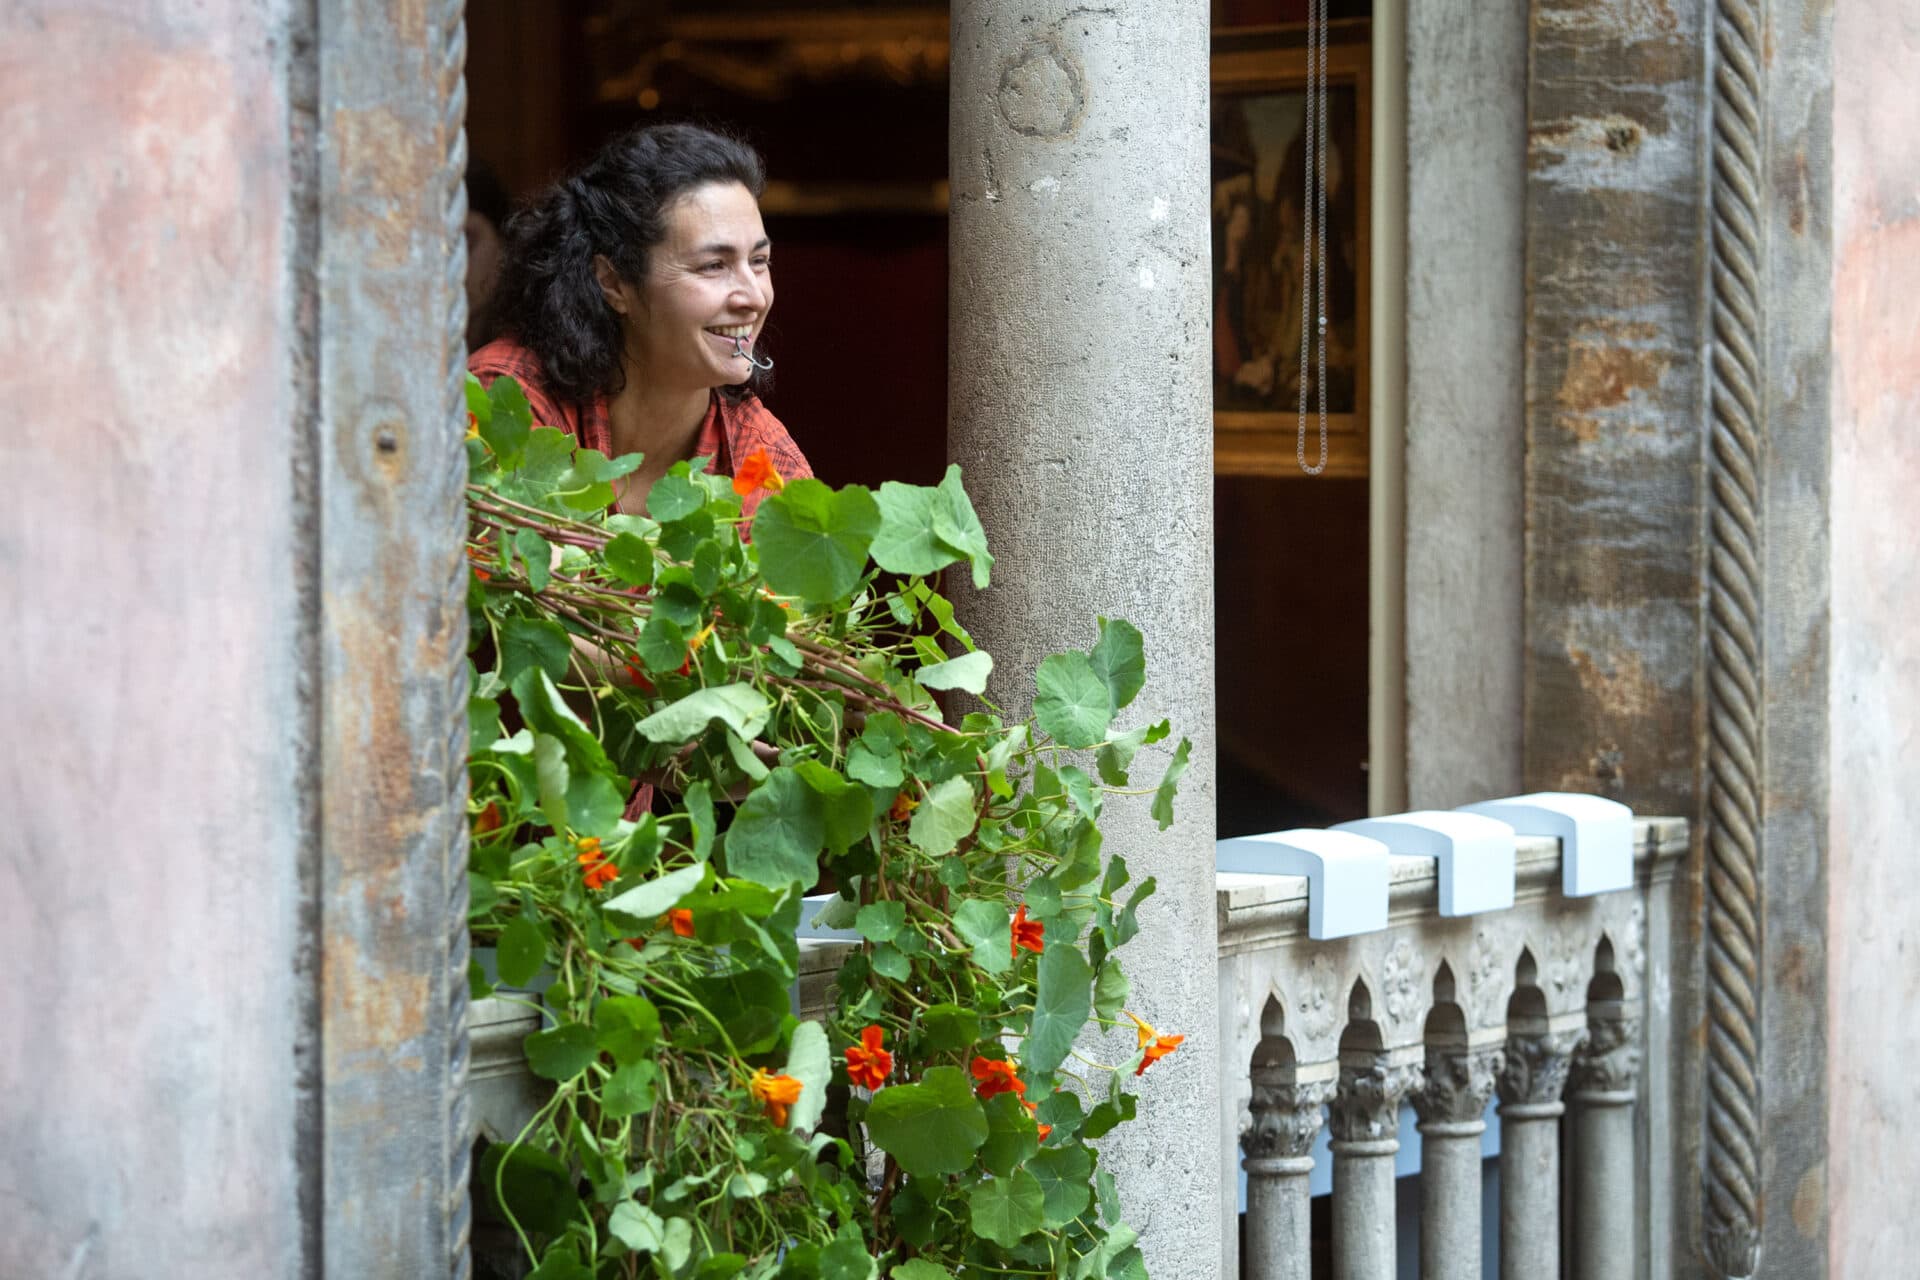 Horticulture Director Erika Rumbley carefully lowers nasturtiums out of a window into the courtyard of the Isabella Stewart Gardner Museum. (Robin Lubbock/WBUR)